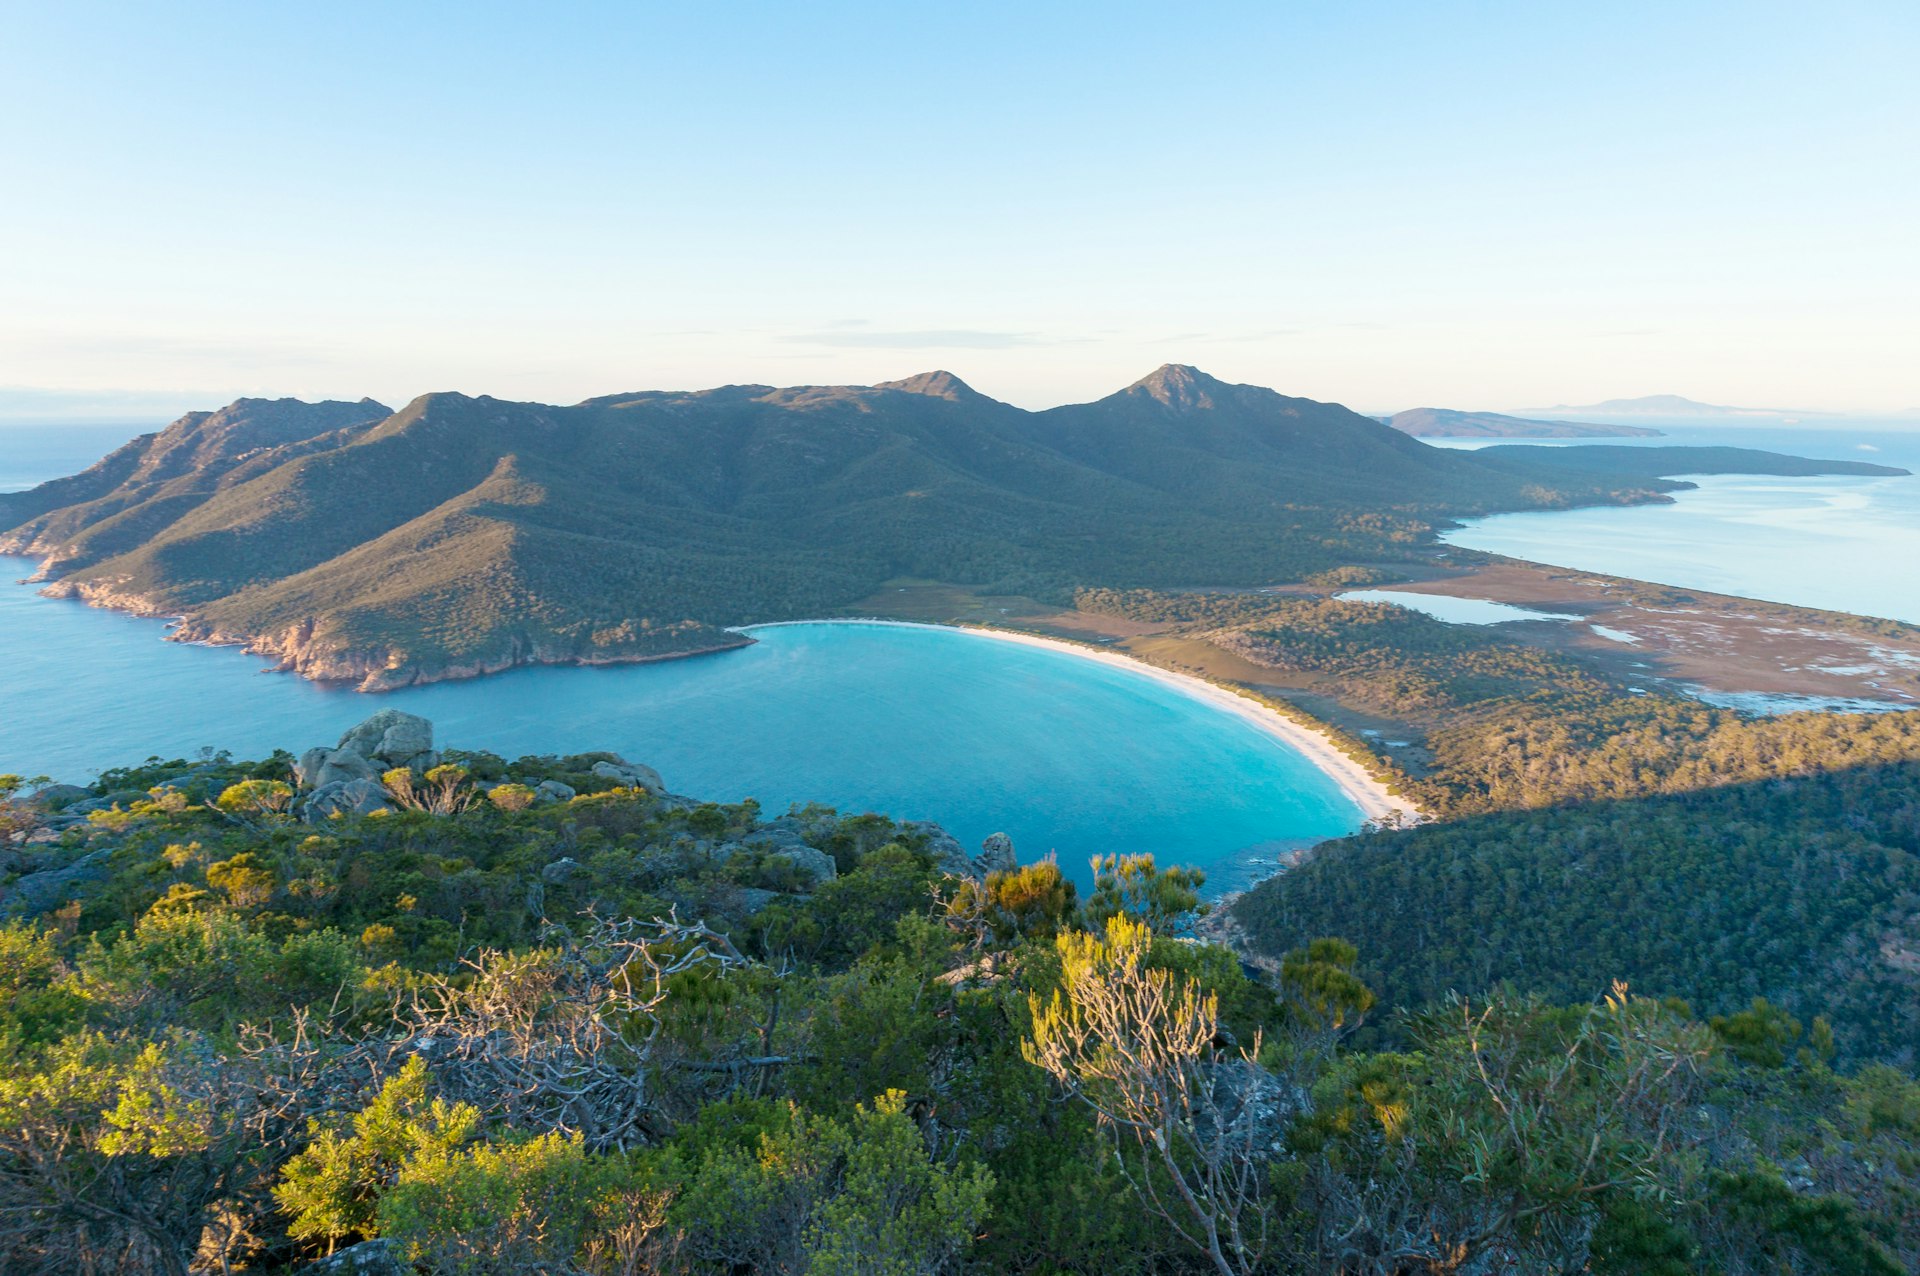 An aerial shot of Wineglass Bay in Tasmania, Australia. The bay's water is turquoise and the arc of the beach is enclosed by greenery.